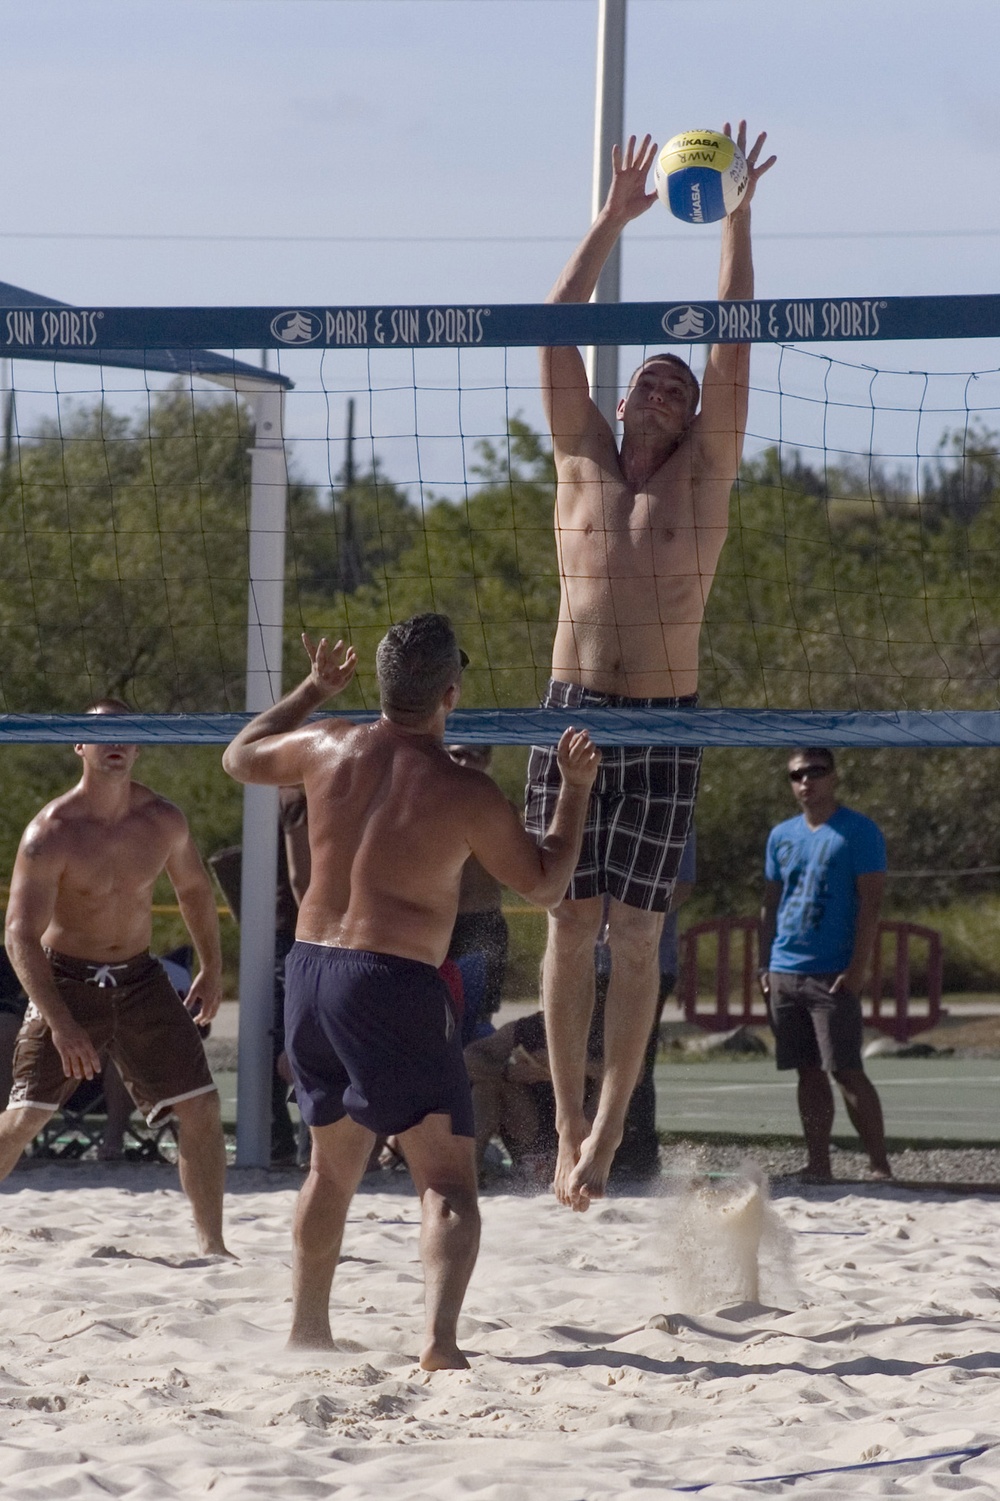 Joint Task Force Guantanamo hosts sand volleyball tournament